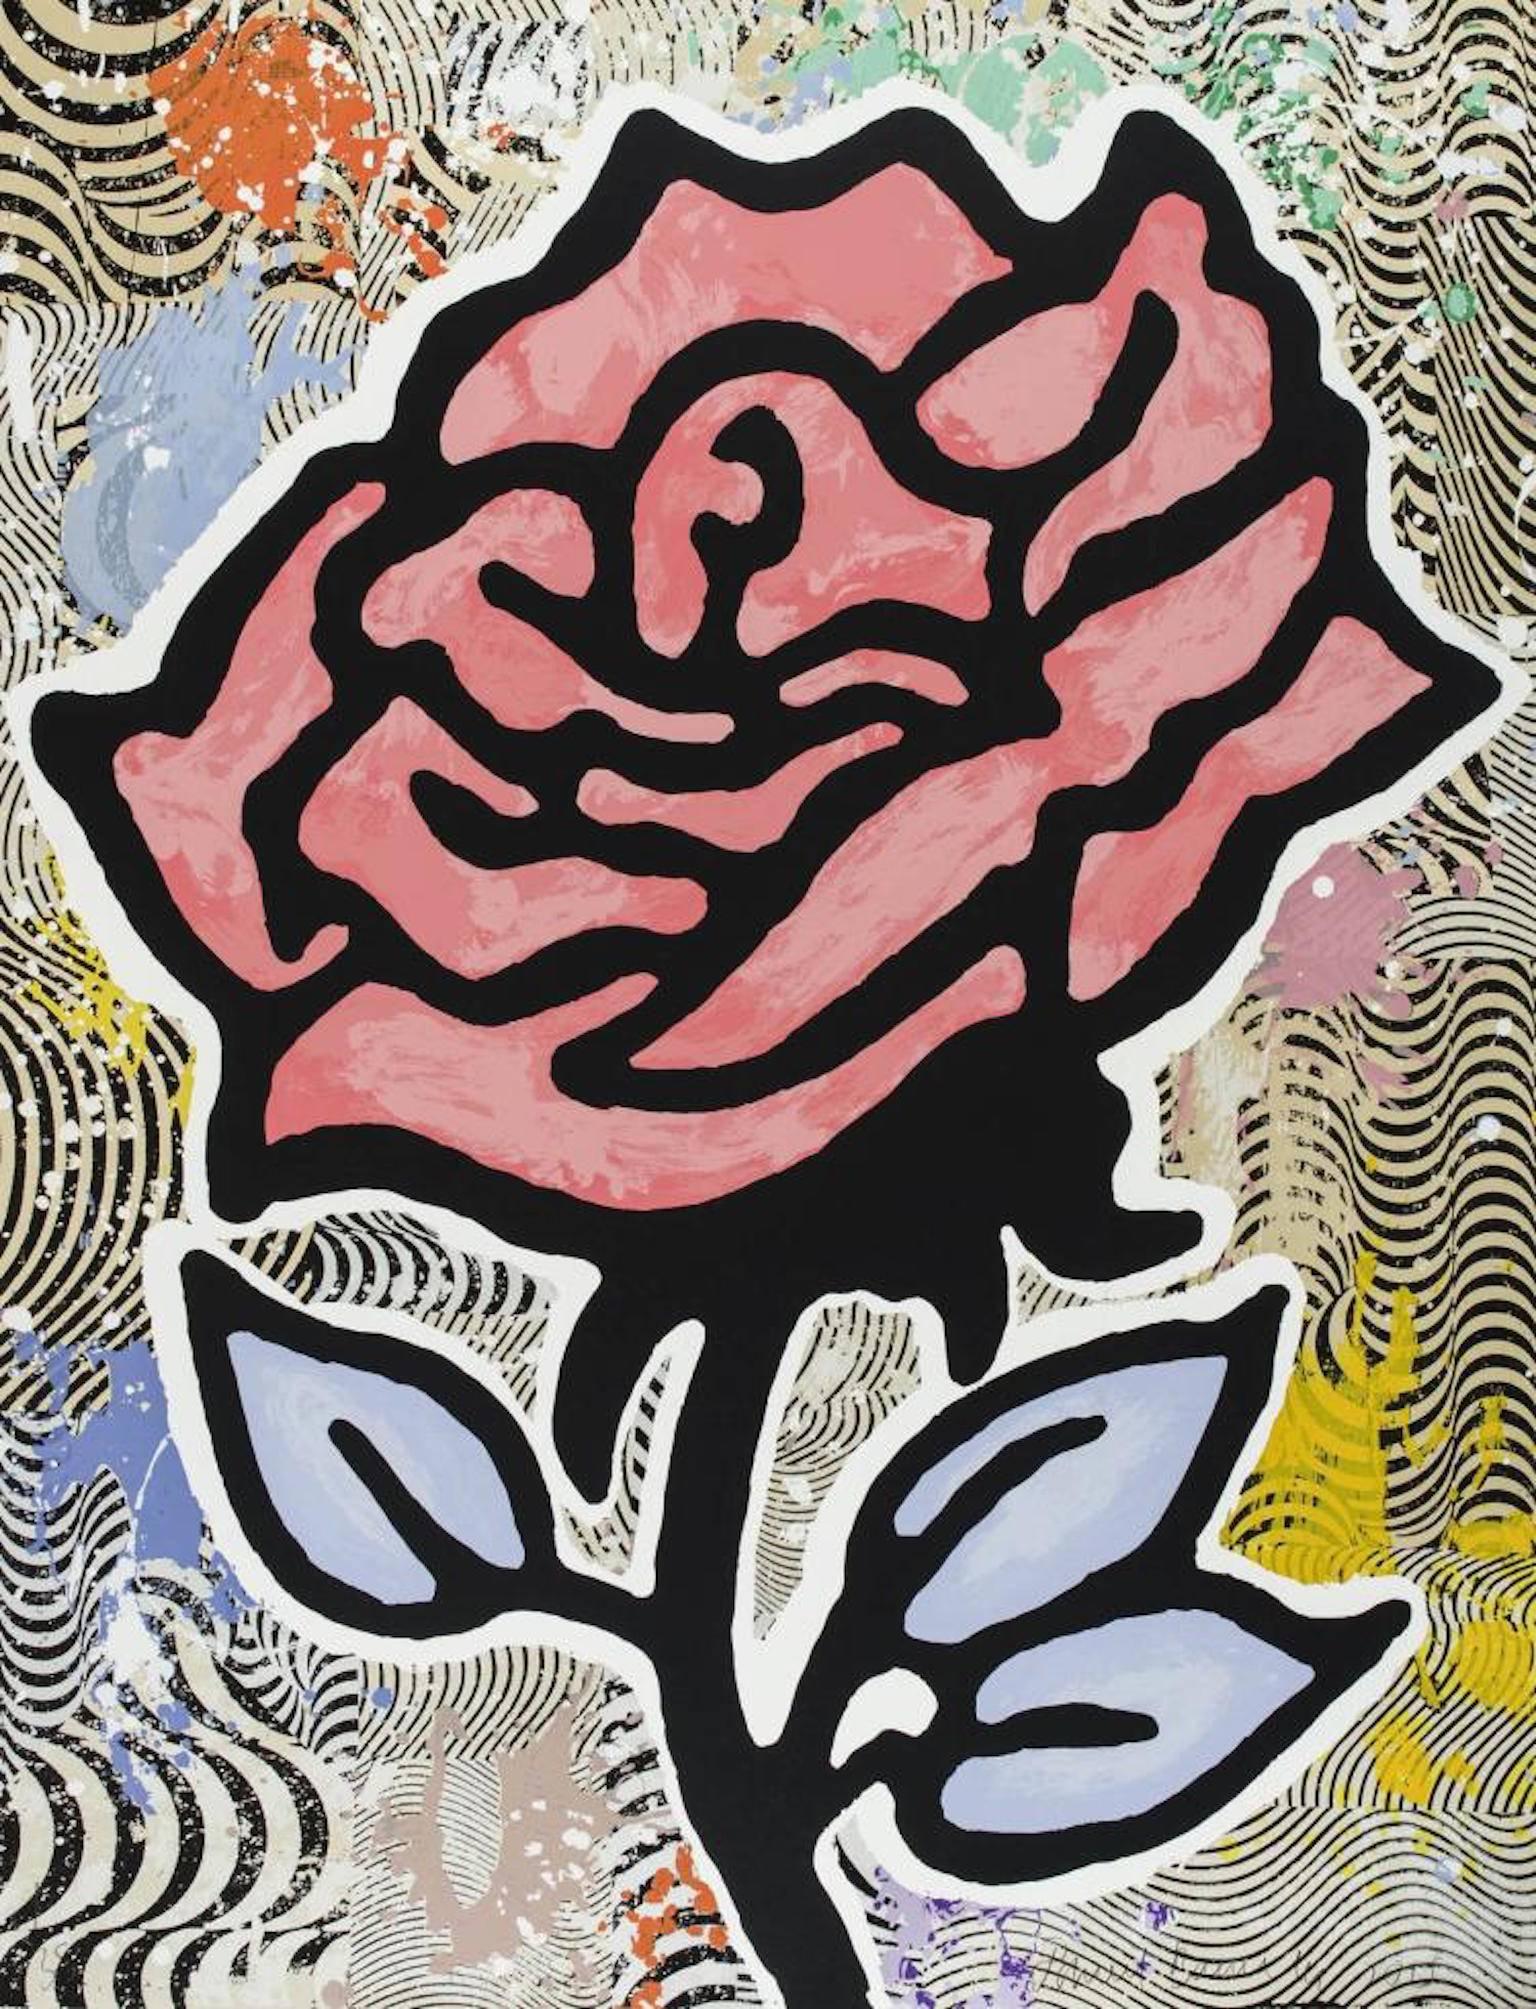 Red Rose - Print by Donald Baechler